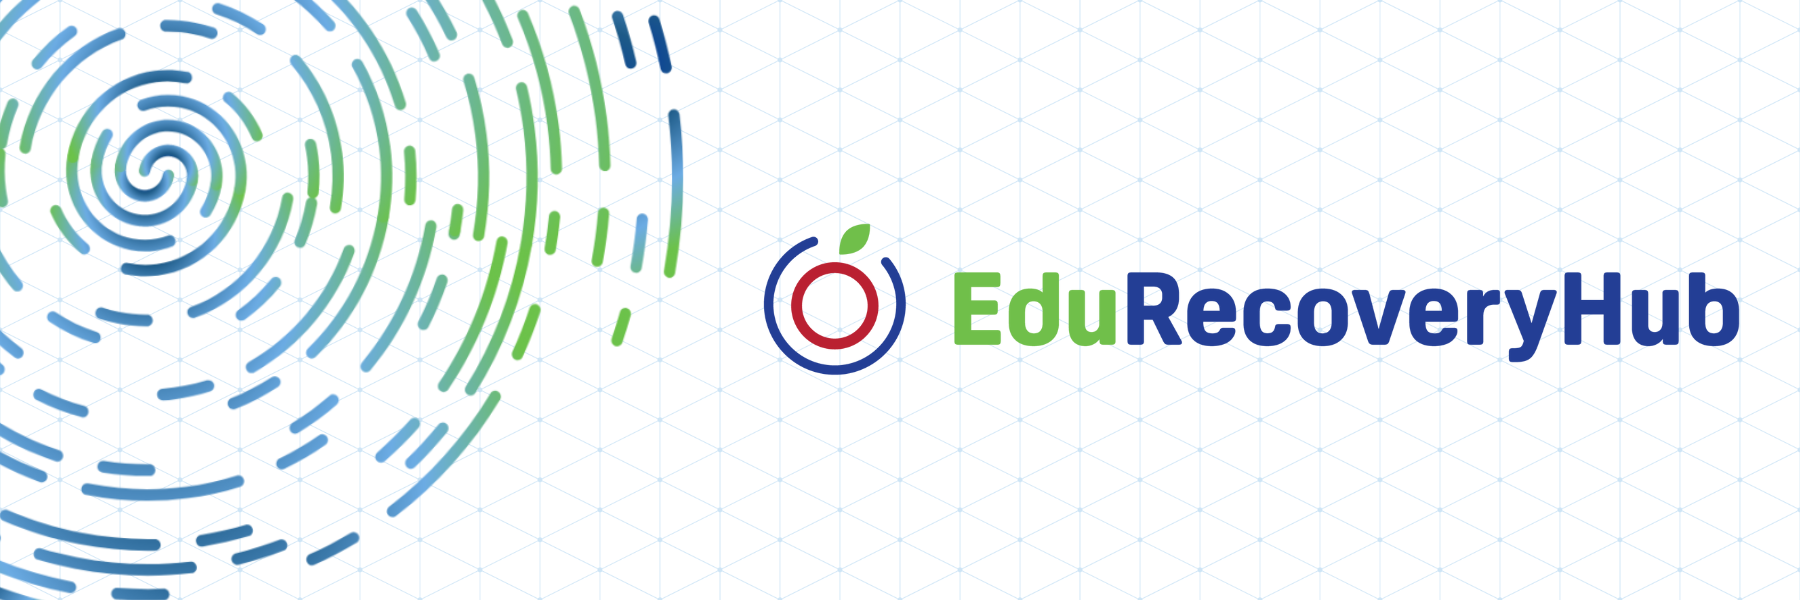 Image for NEW – EduRecoveryHub Now Features More Than 50 Expert-Reviewed Recovery Practices